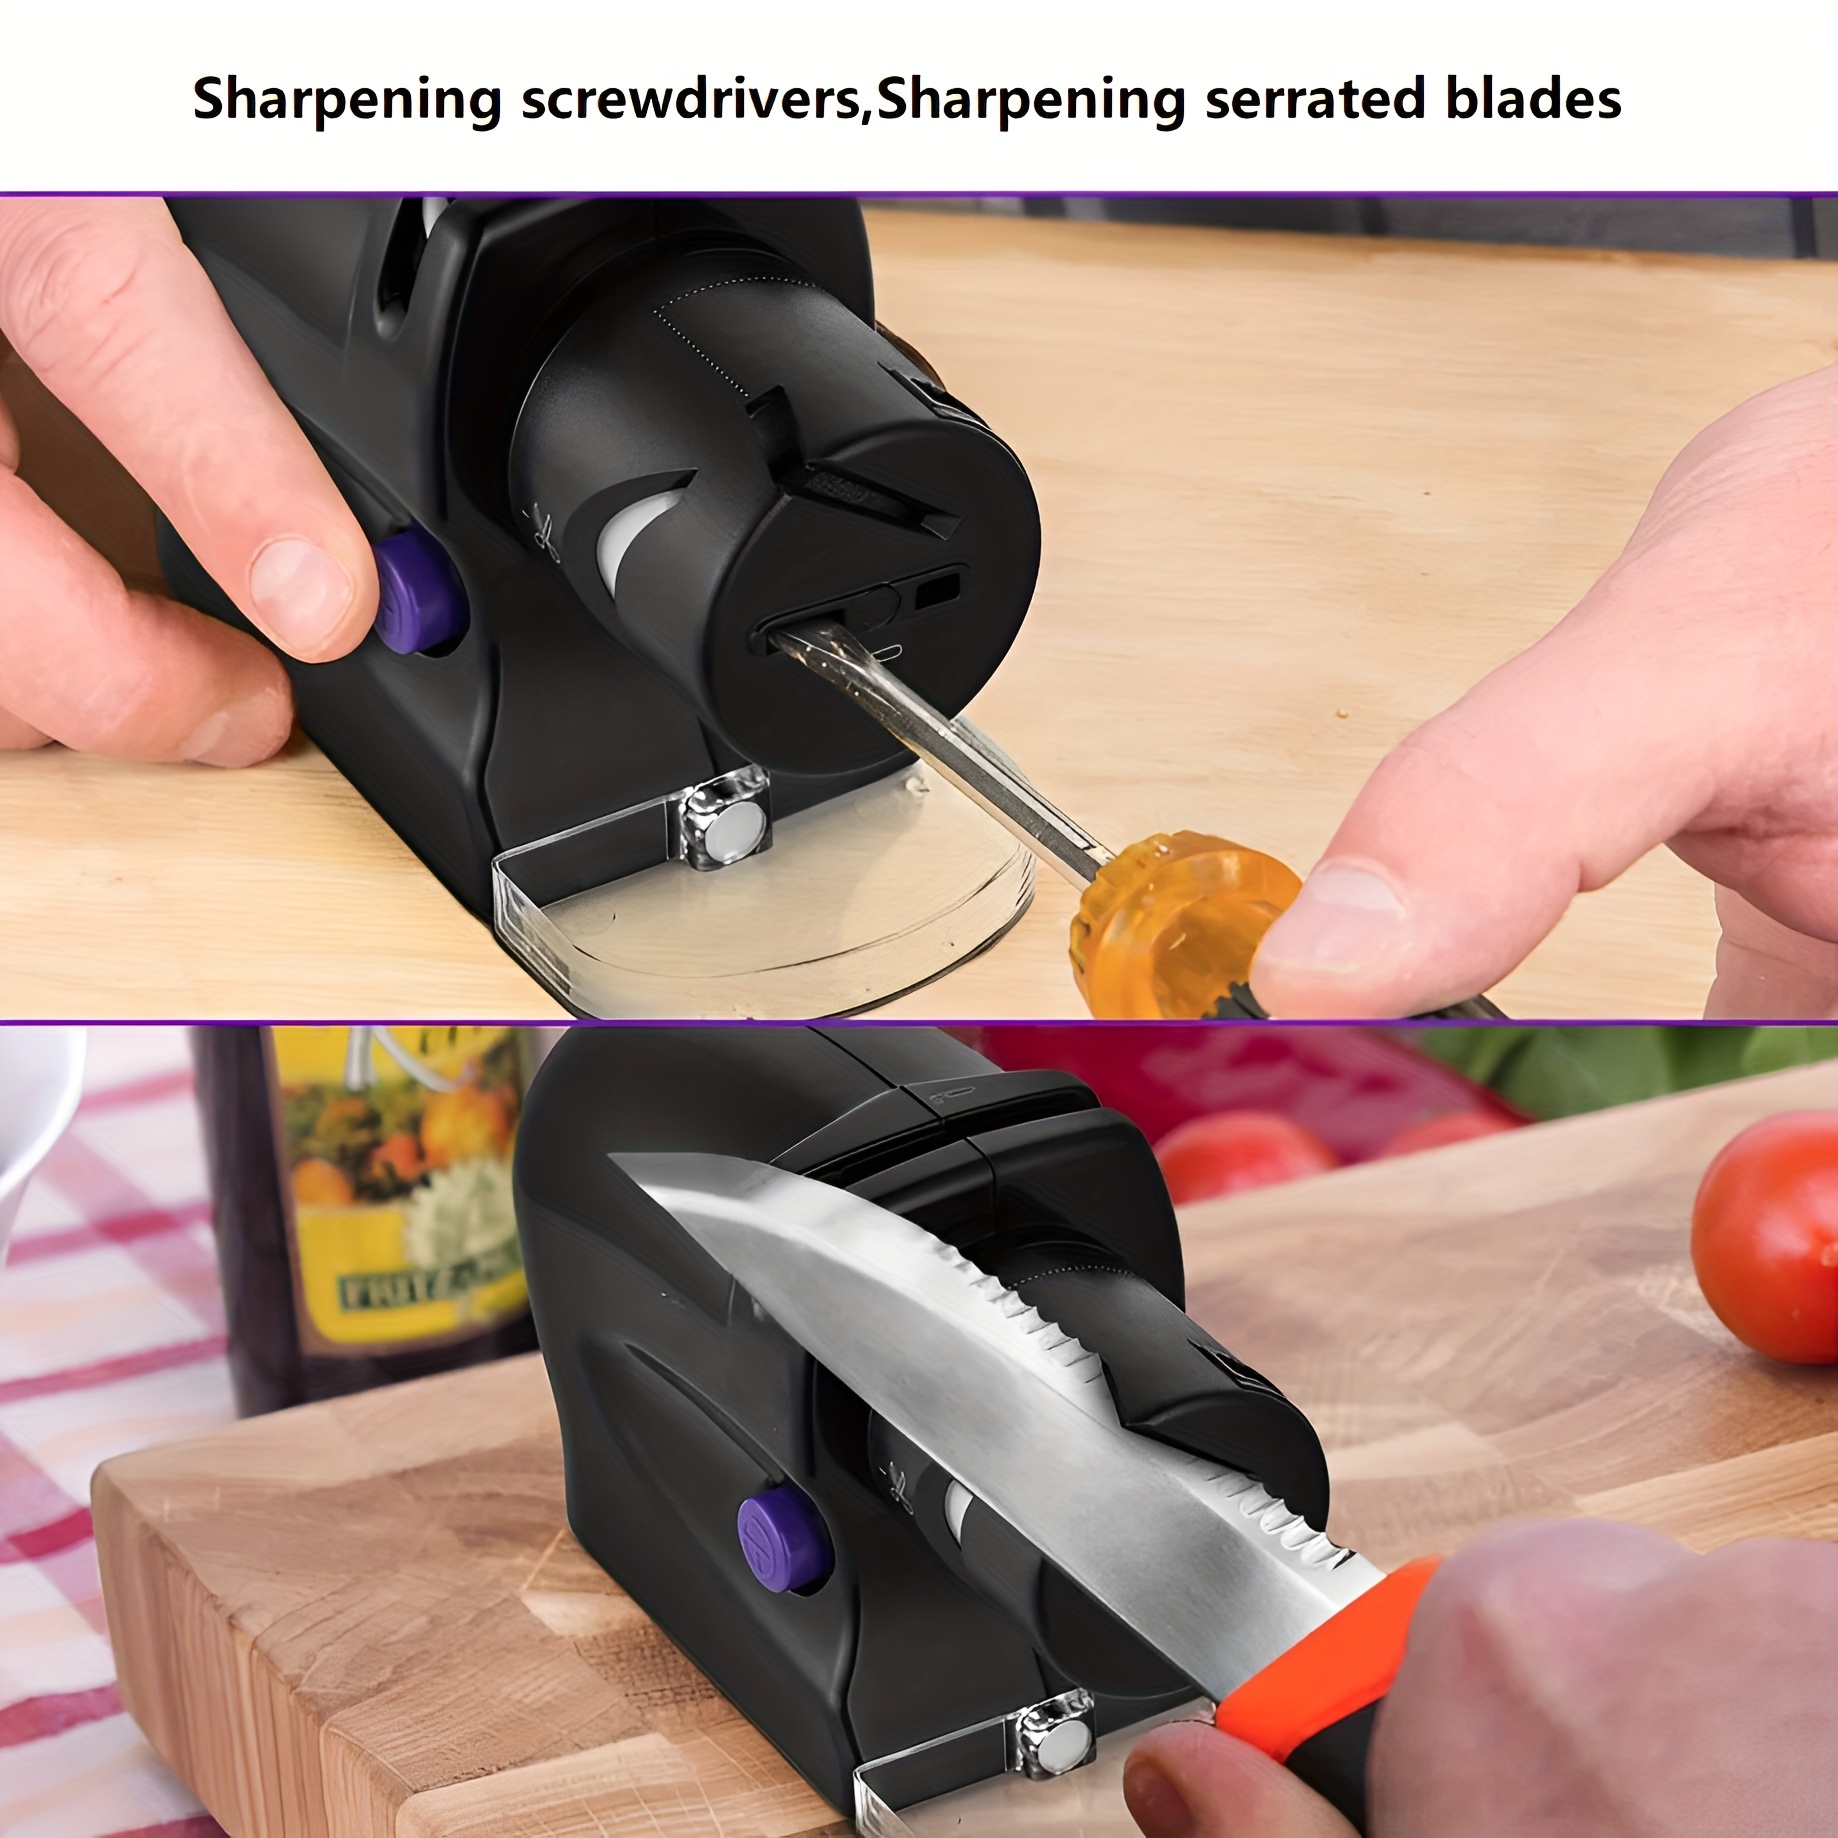 How to Sharpen a Knife with an Electric Knife Sharpener